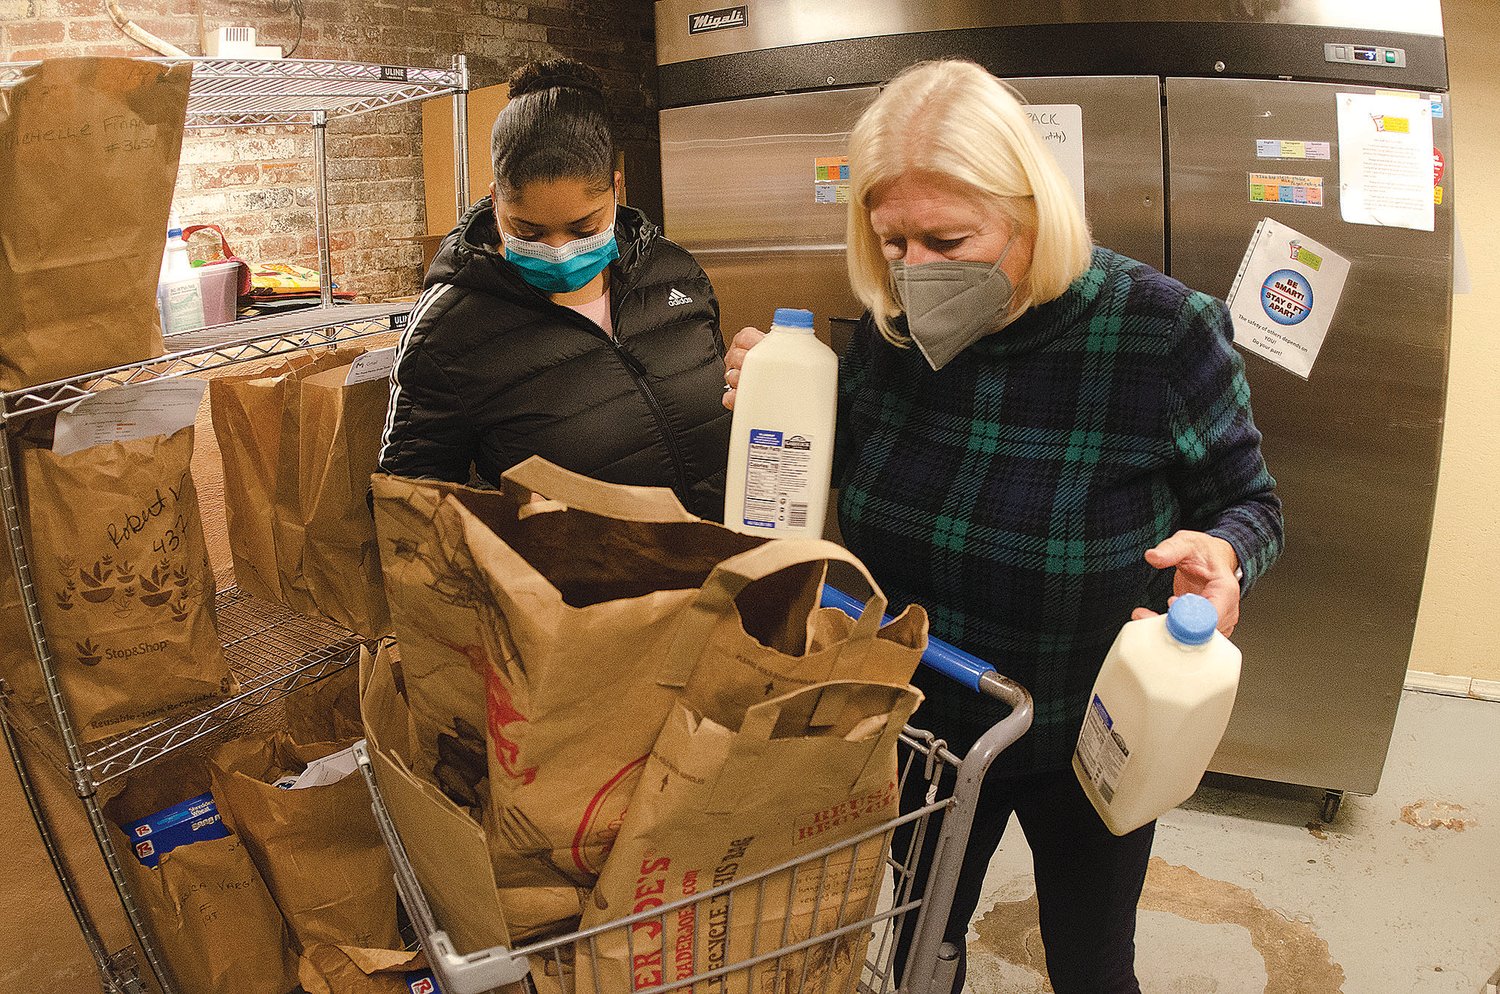 East Bay Food Pantry volunteer Lynn Carlson places two cartons of milk into a bag for client Mishelly Santiago last Wednesday.